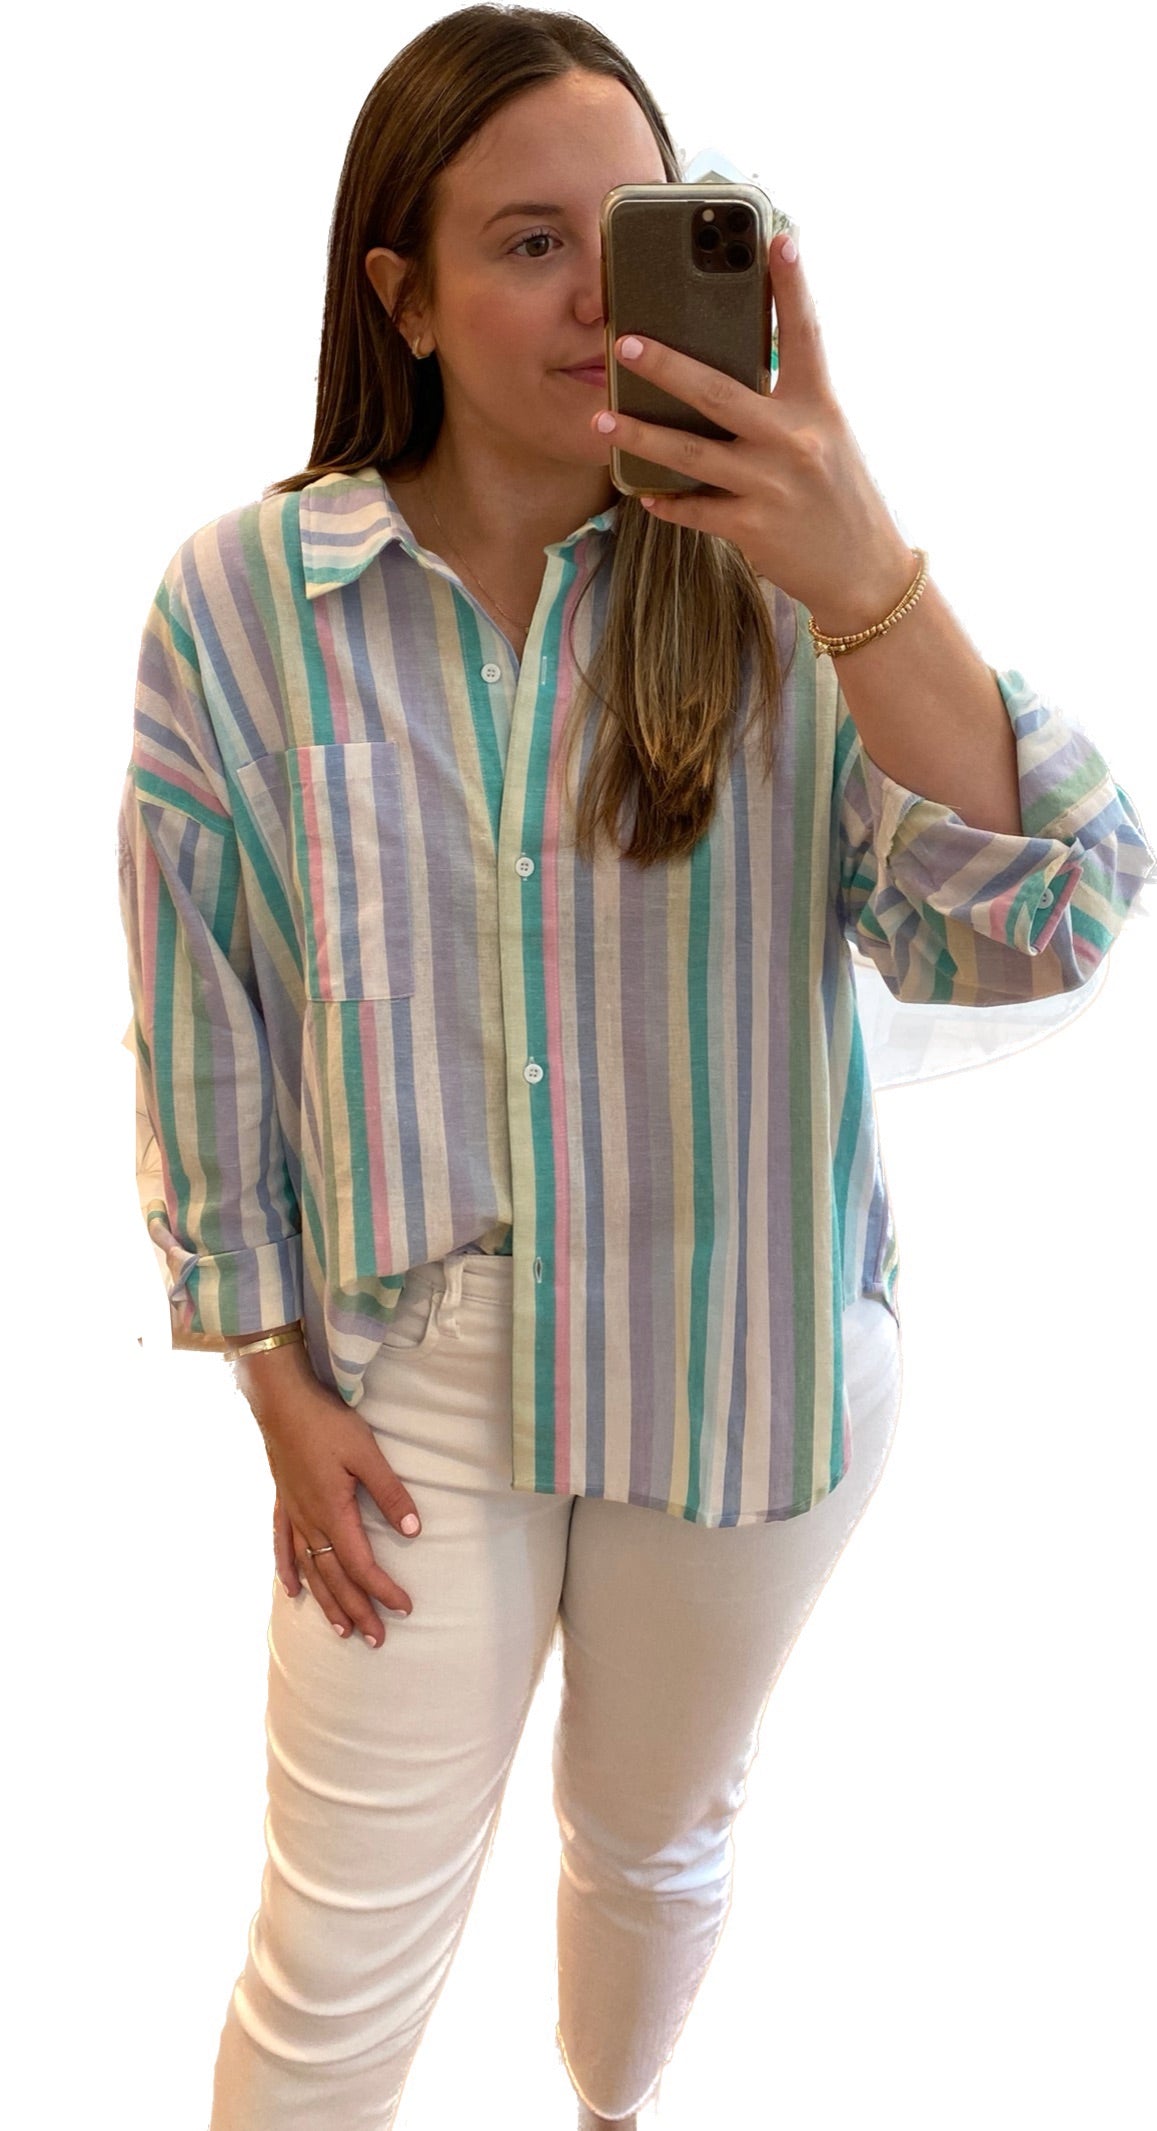 Candy Stripe Button Up Top